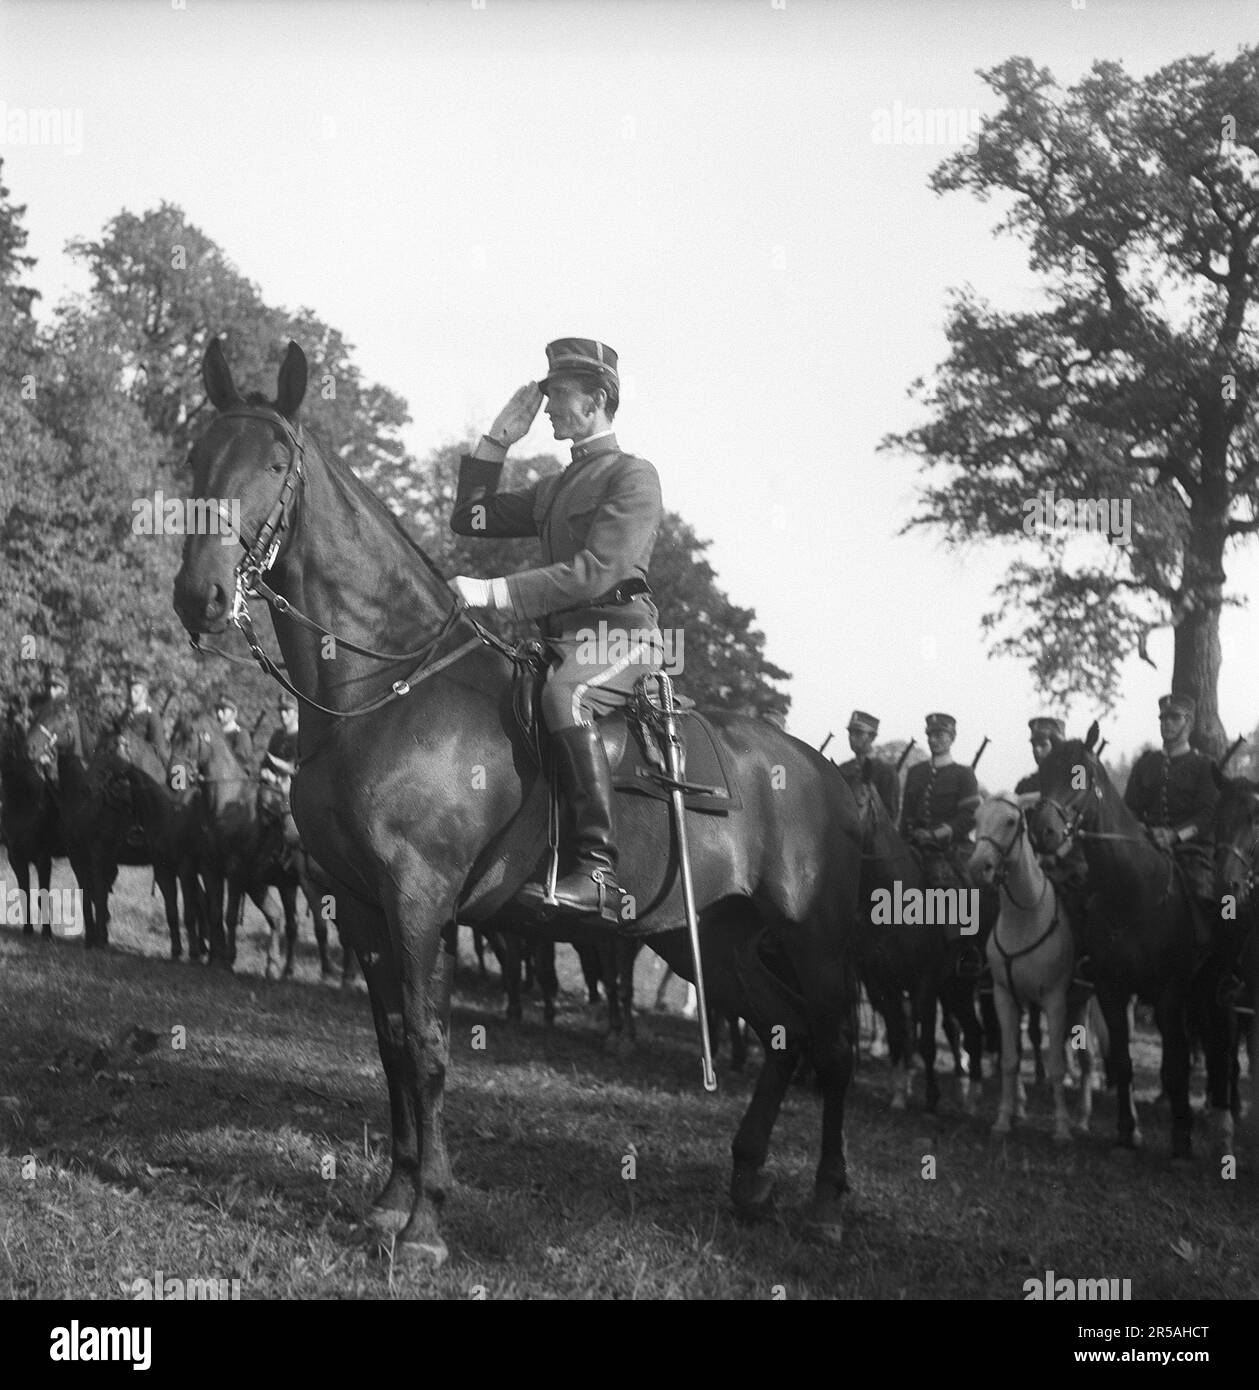 Swedish officer in the cavalry. Saluting while sitting on his horse with soldiers in line in the background.  At the time when the picture was taken, the Second World War was going on. Sweden mobilized soldiers and increased preparedness. On April 7, 1940, it was decided to start mobilizing the cavalry brigade. The main tasks of the cavalry are reconnaissance and rapid assault. In 1970 new acquisition of horses ceased.  Sweden in 1943. Kristoffersson ref F16-5 Stock Photo